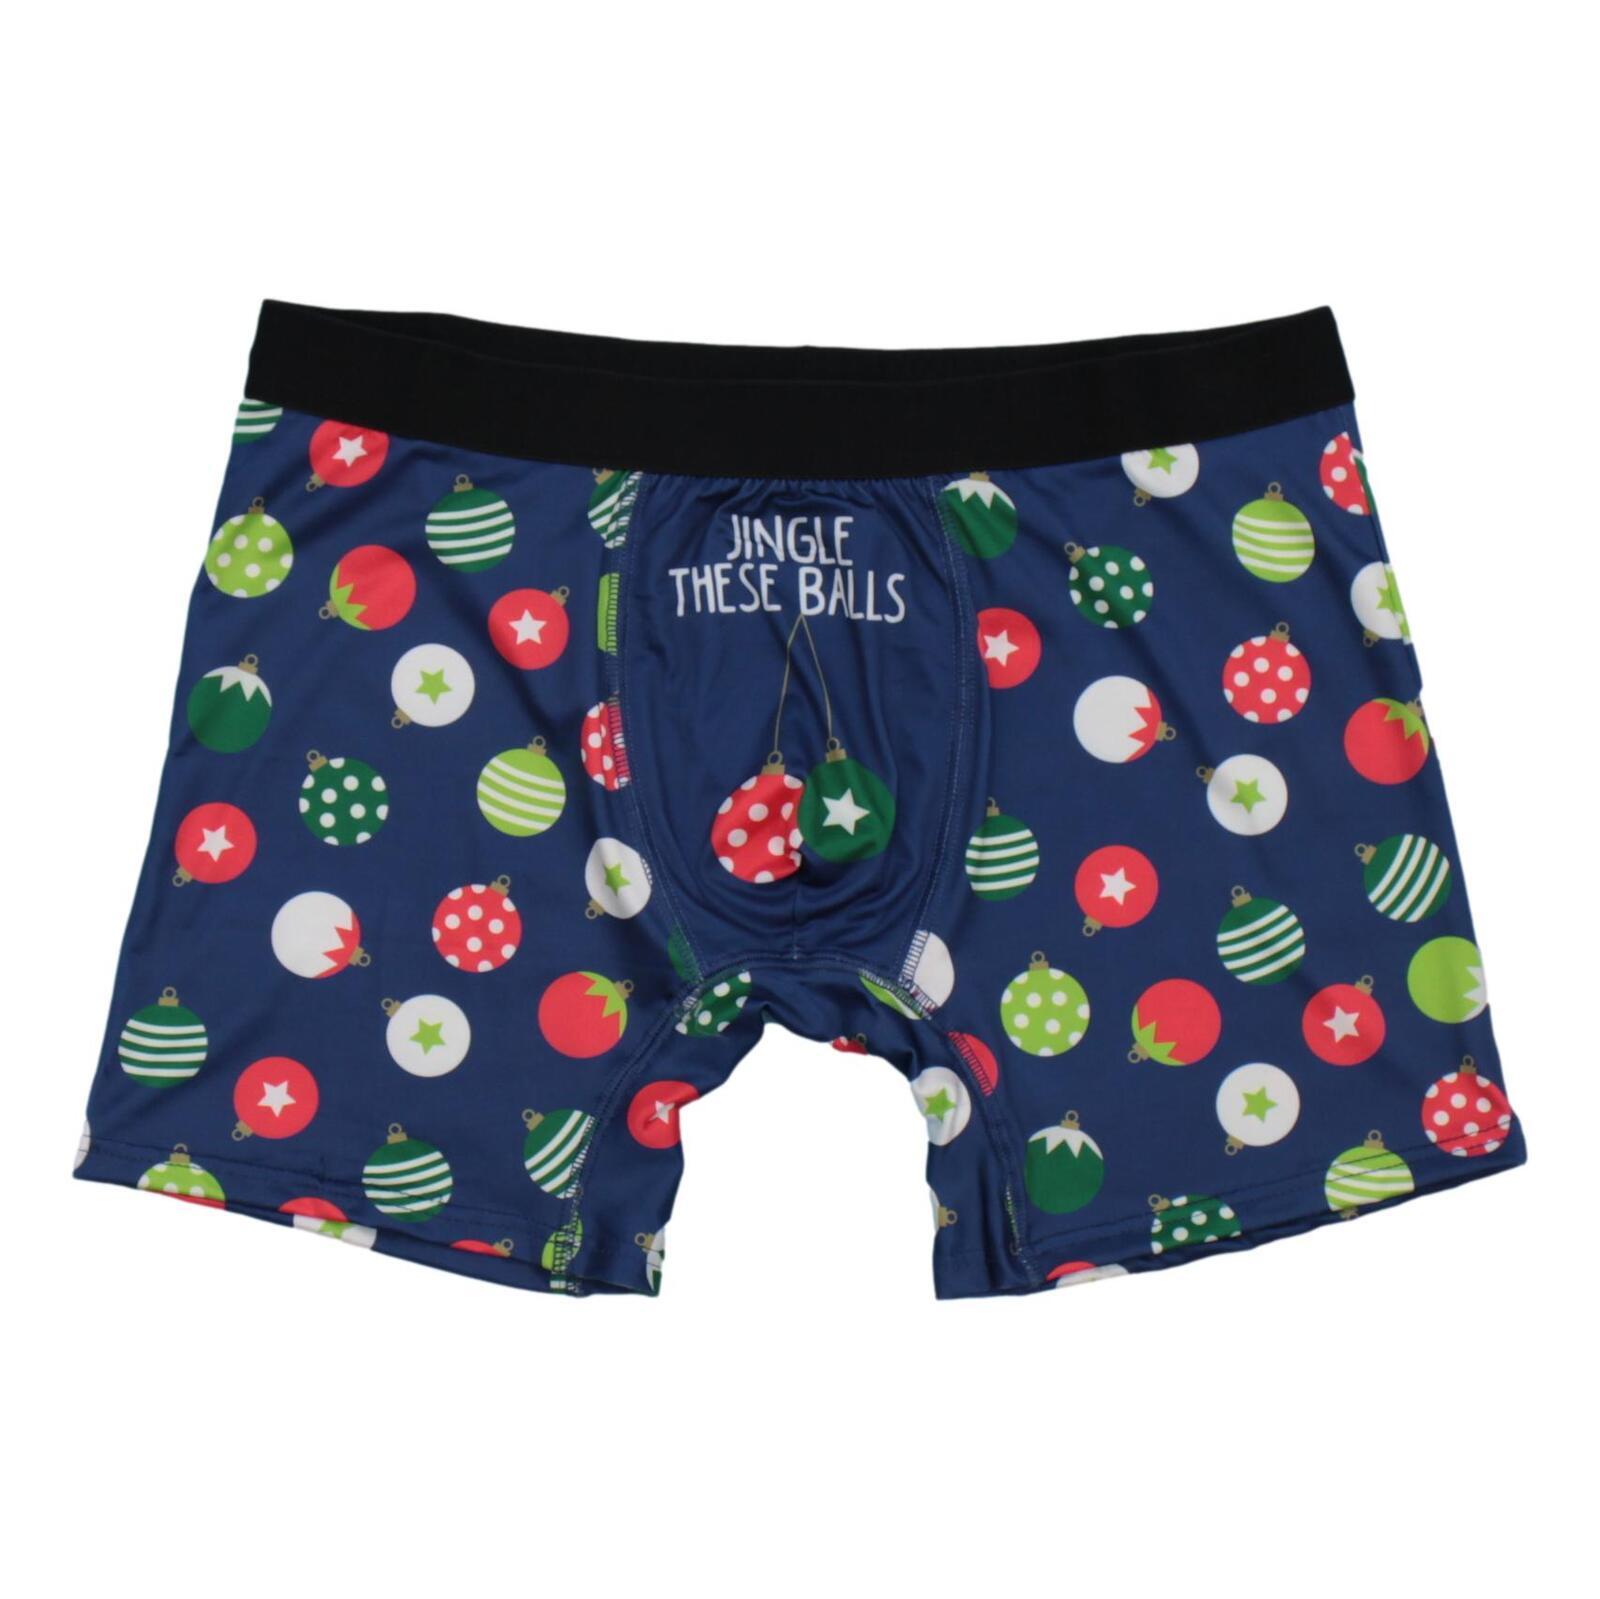  Mens Funny Boxers, Christmas Boxer Briefs, Funny